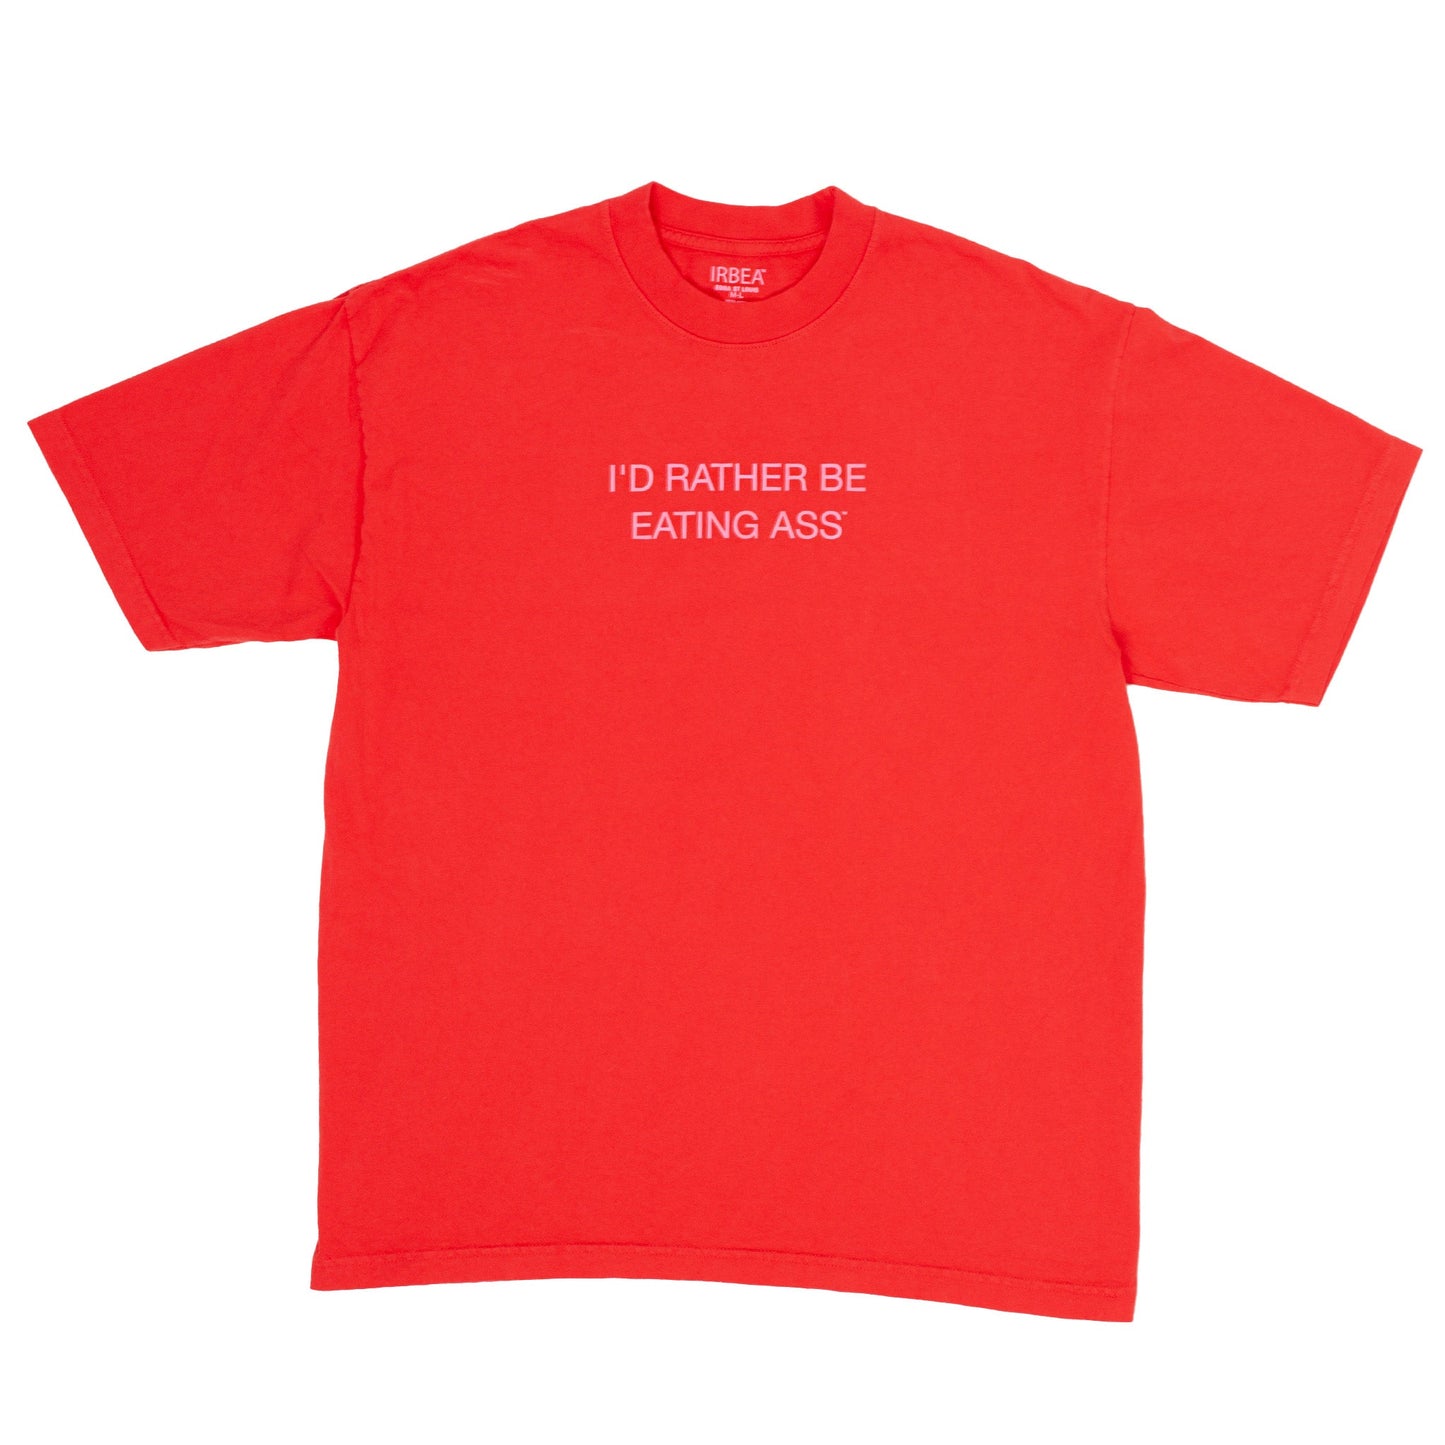 I'D RATHER BE EATING ASS OVERSIZED T-SHIRT - RED